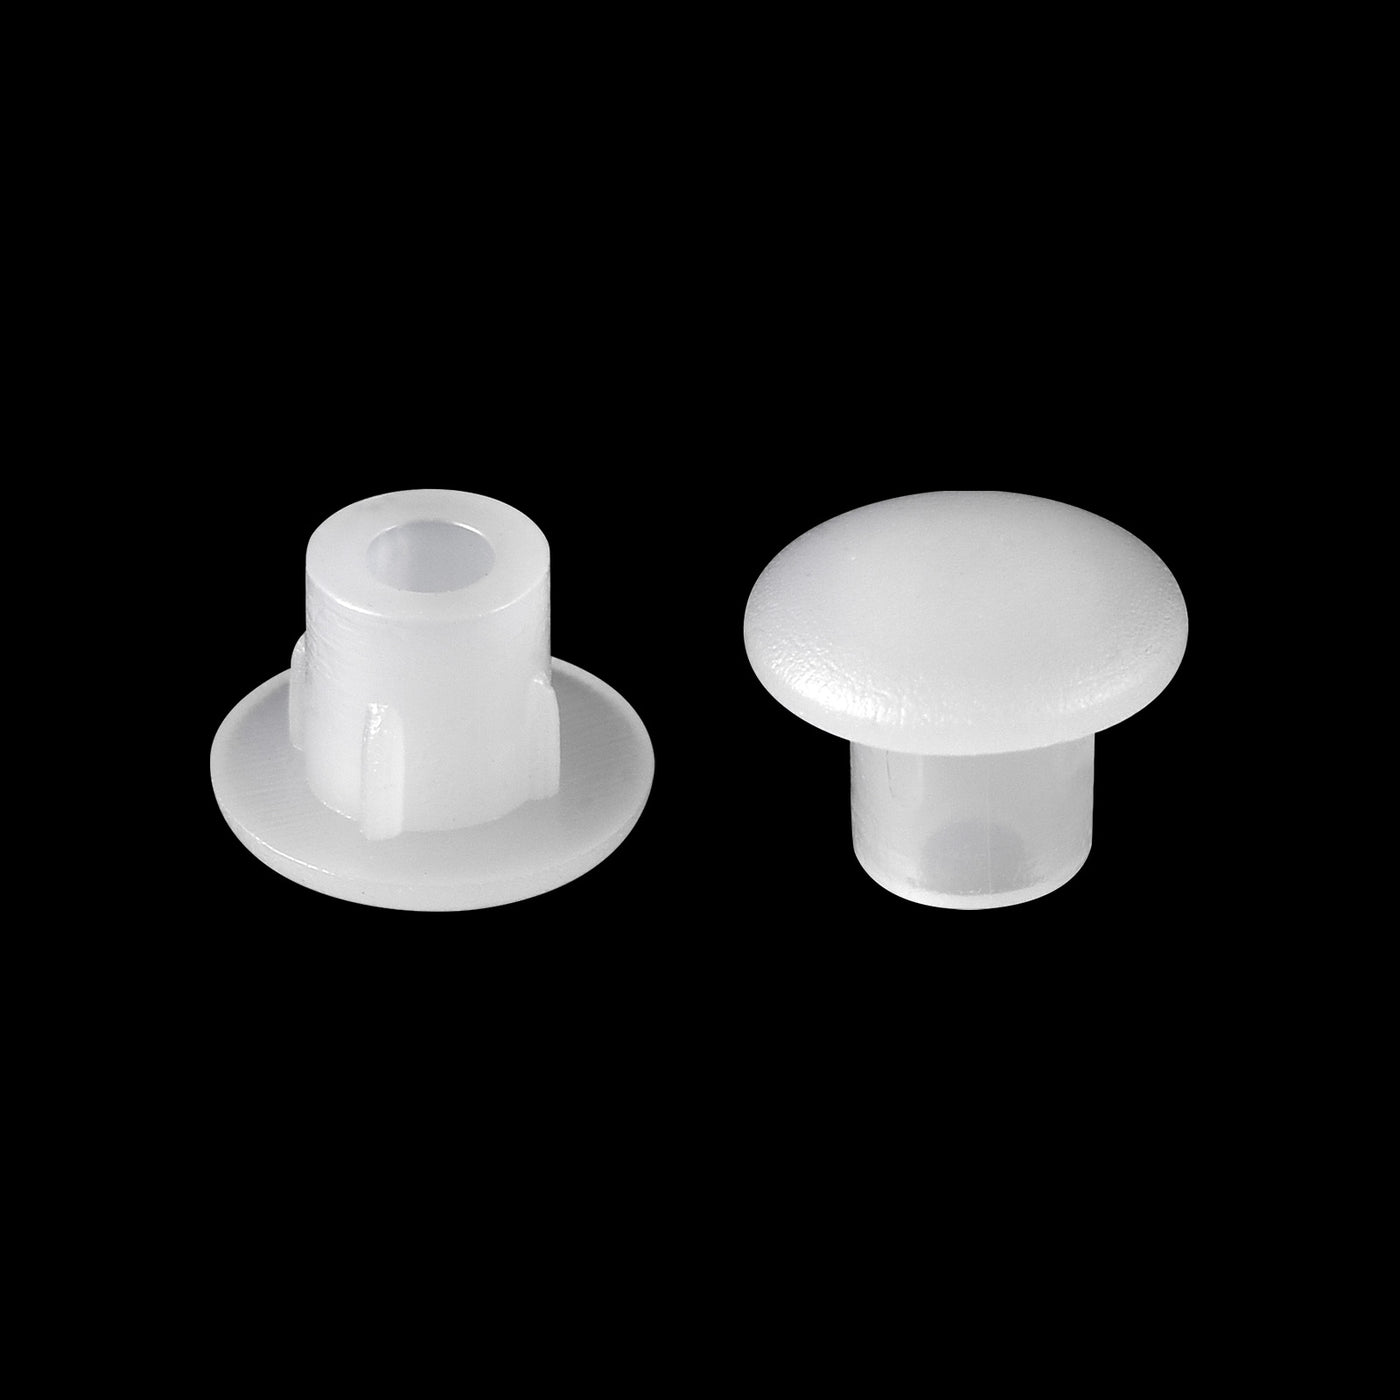 uxcell Uxcell Screw Hole Plugs, 5mm(3/16") Dia PP Snap in Shelf Button Flush Type Caps for Furniture Cabinet Cupboard, Clear White 180 Pcs